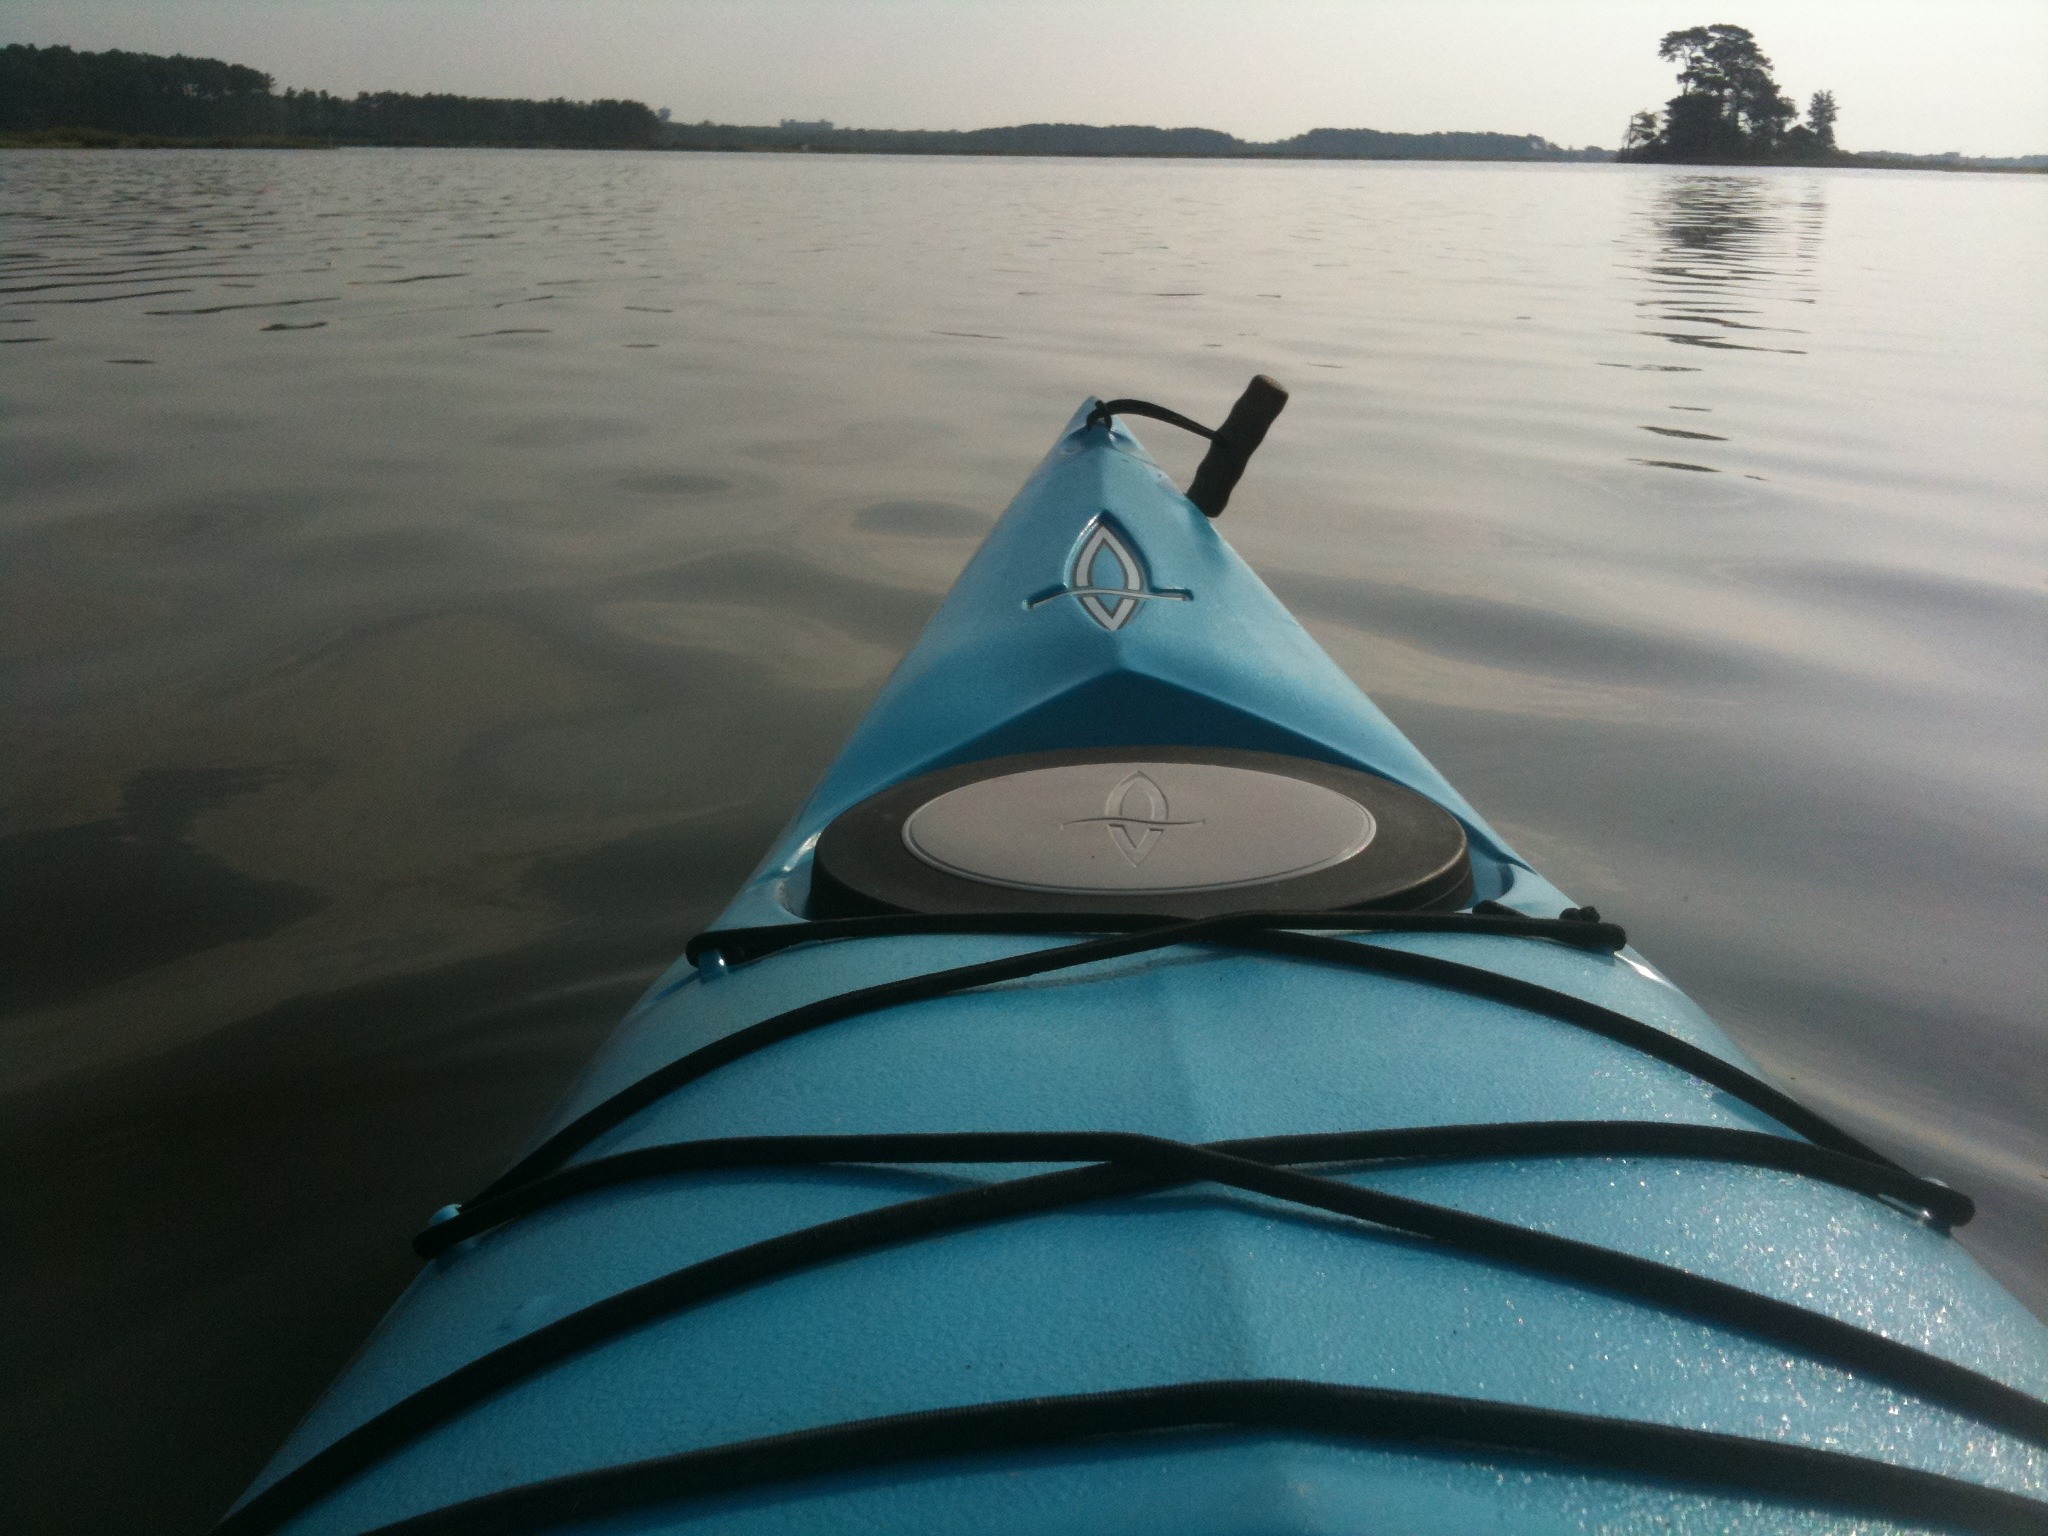 Along the Water Trail - Morning Paddle in Assawoman Refuge